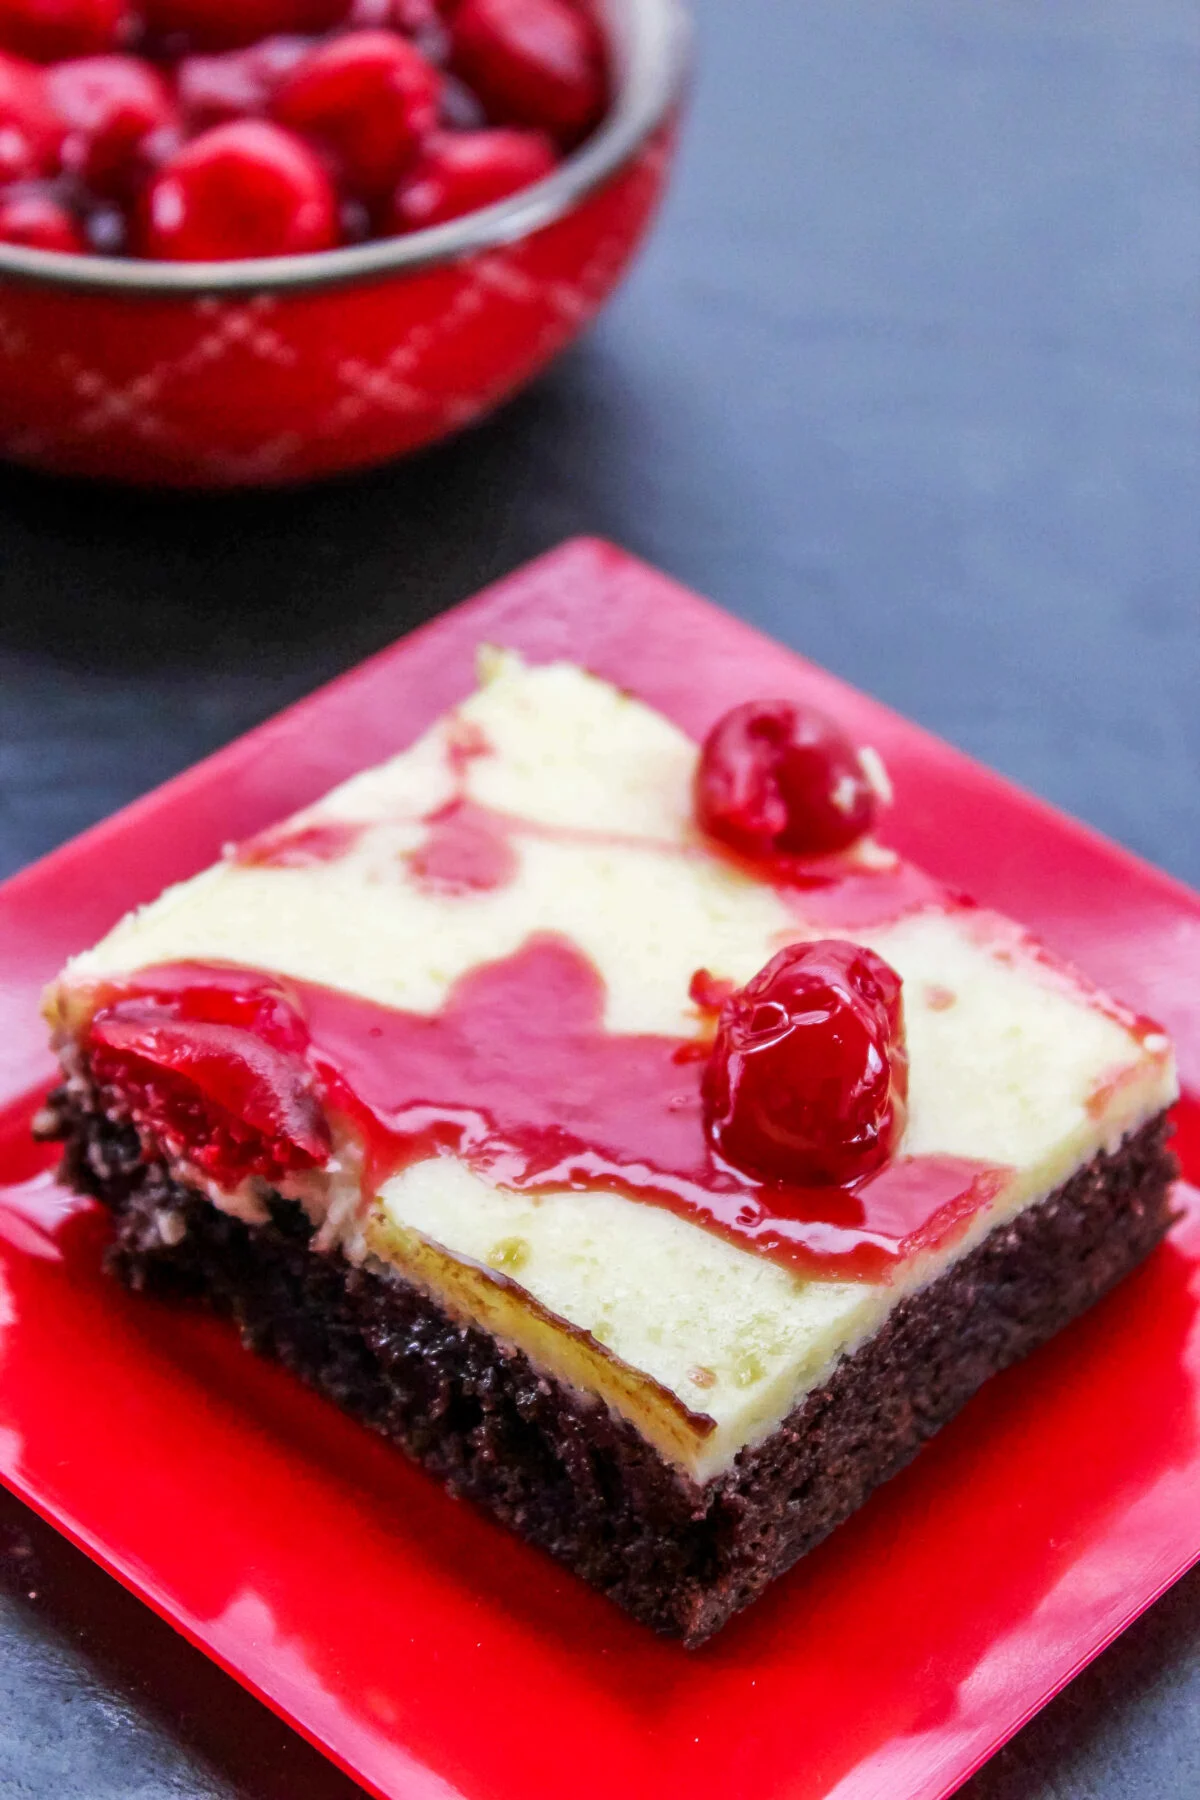 These Cherry Cheesecake Brownies are gooey, fudgy and perfectly sweet. The cheesecake center sends them over the top! Easy to make too.